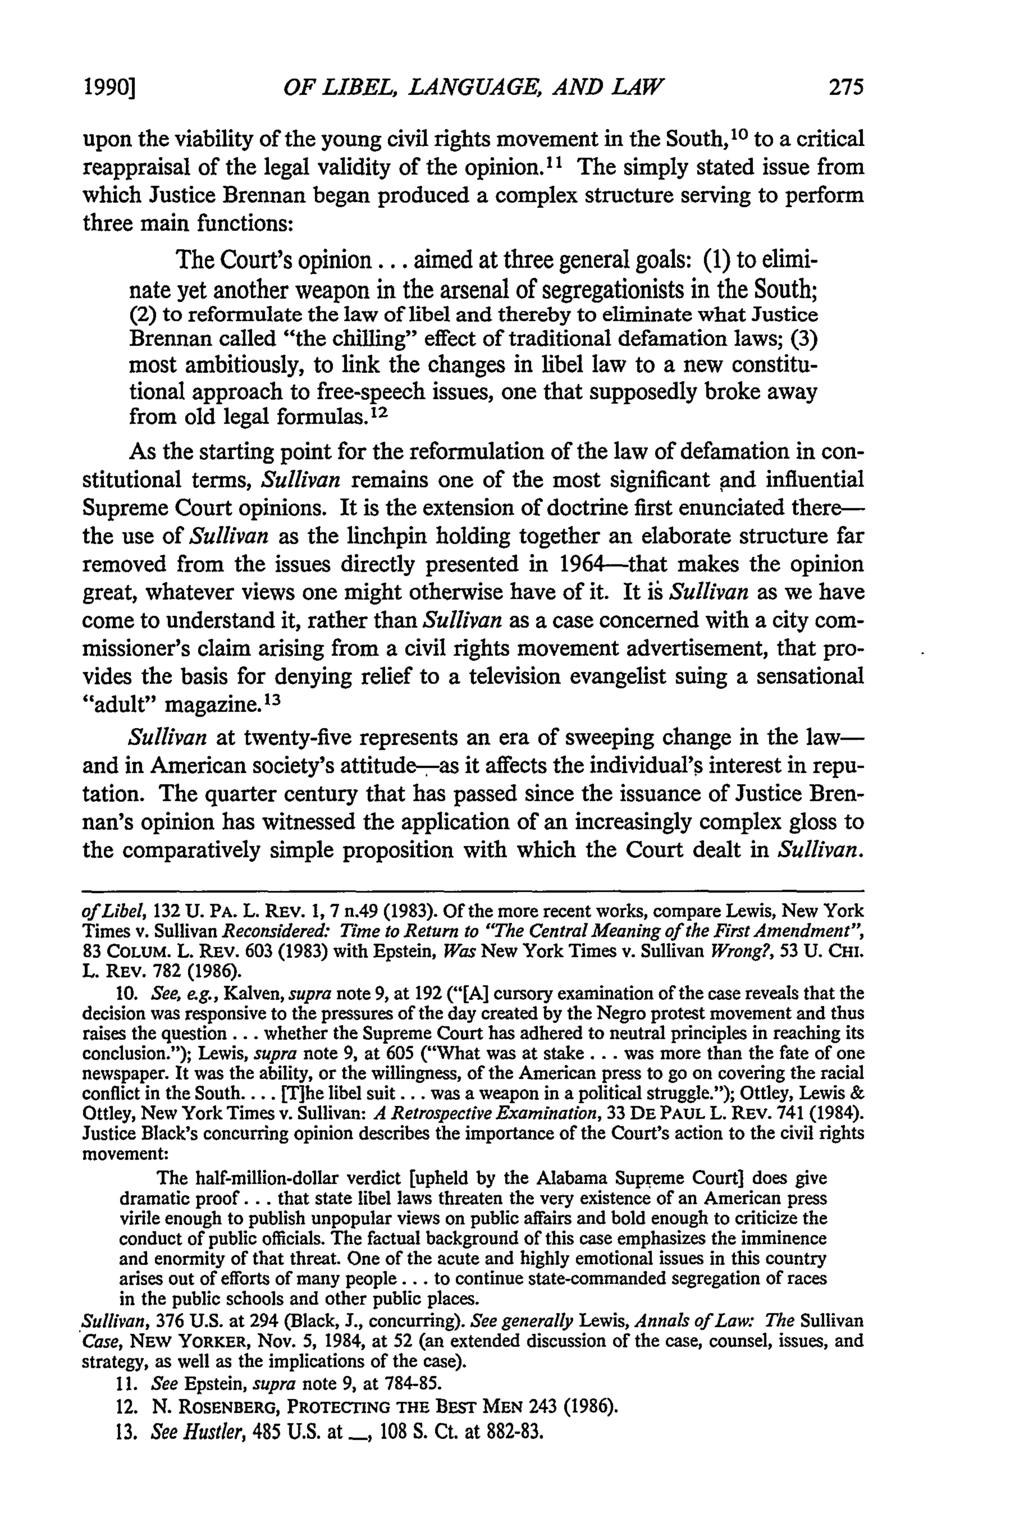 1990] OF LIBEL, LANGUAGE, AND LAW upon the viability of the young civil rights movement in the South, 10 to a critical reappraisal of the legal validity of the opinion.